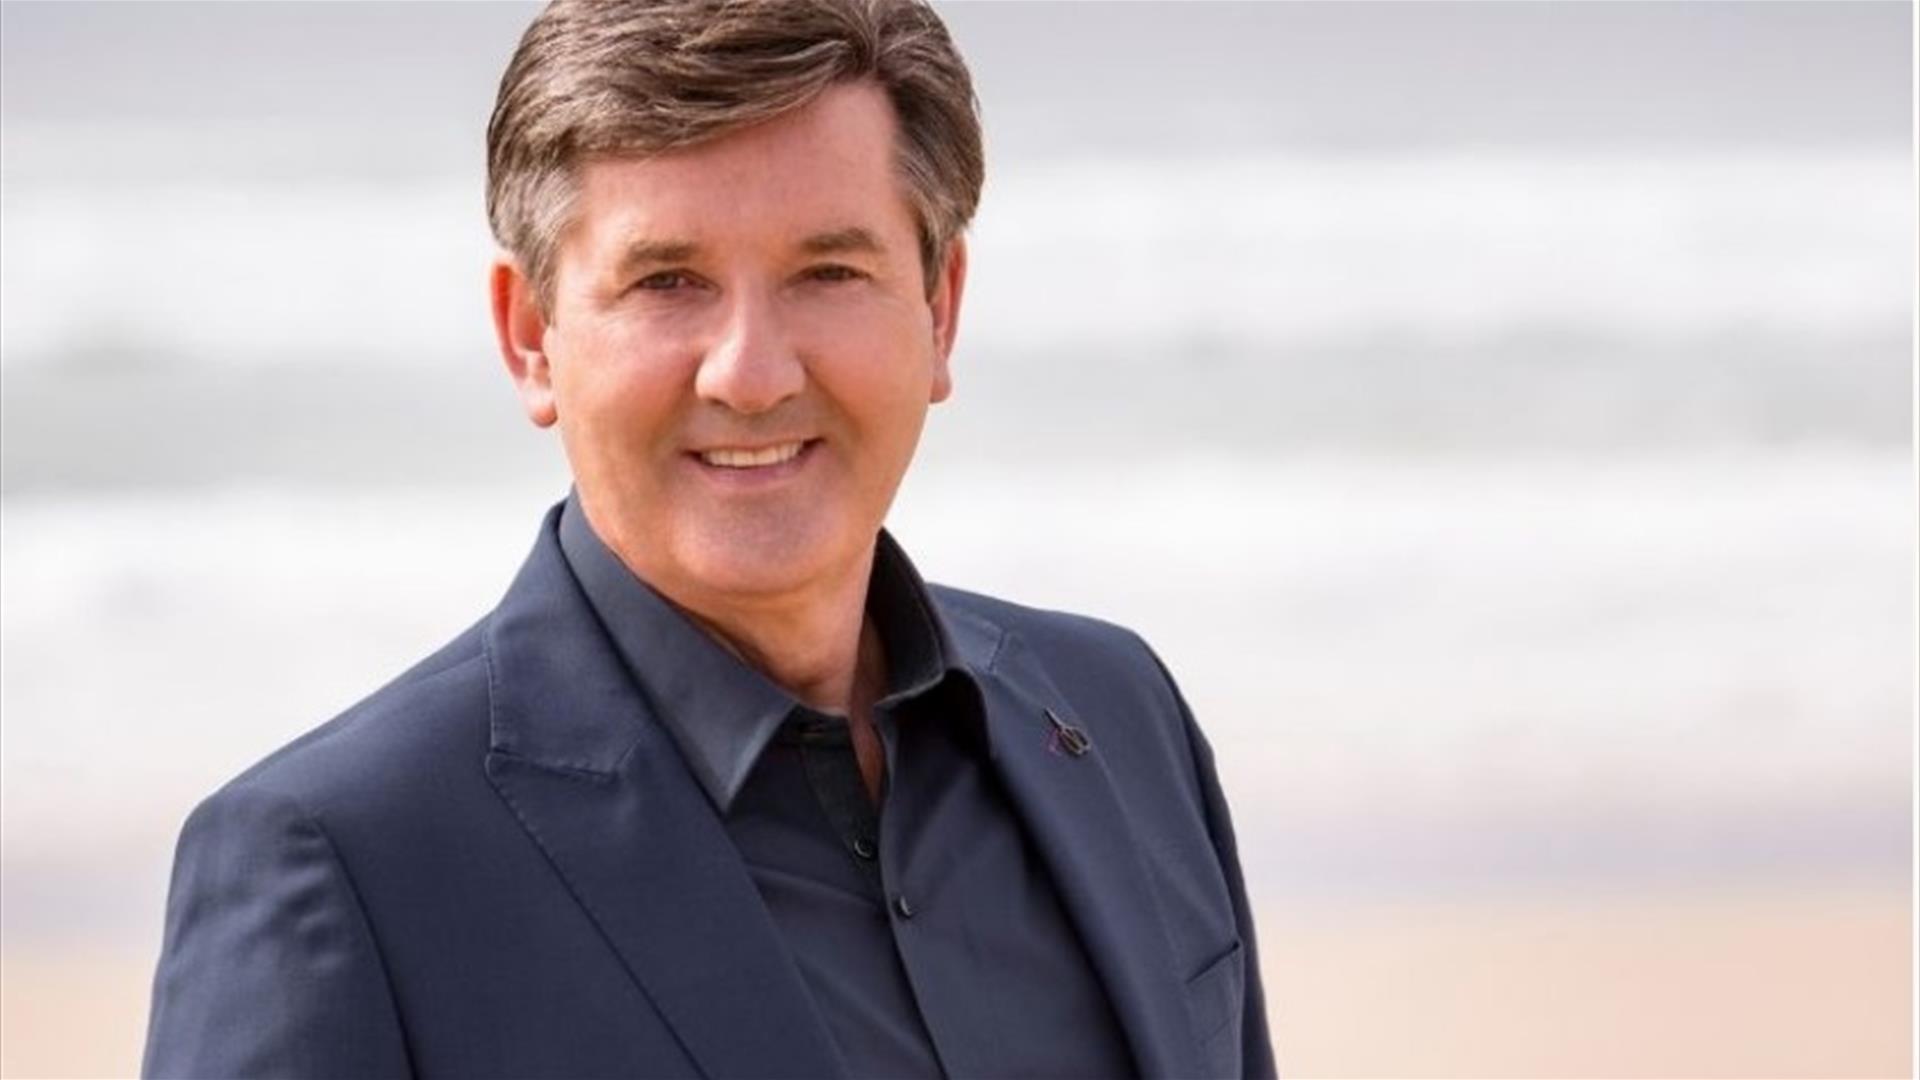 Daniel O'Donnell pictured in a black suit and shirt, smiling in front of a blurred background